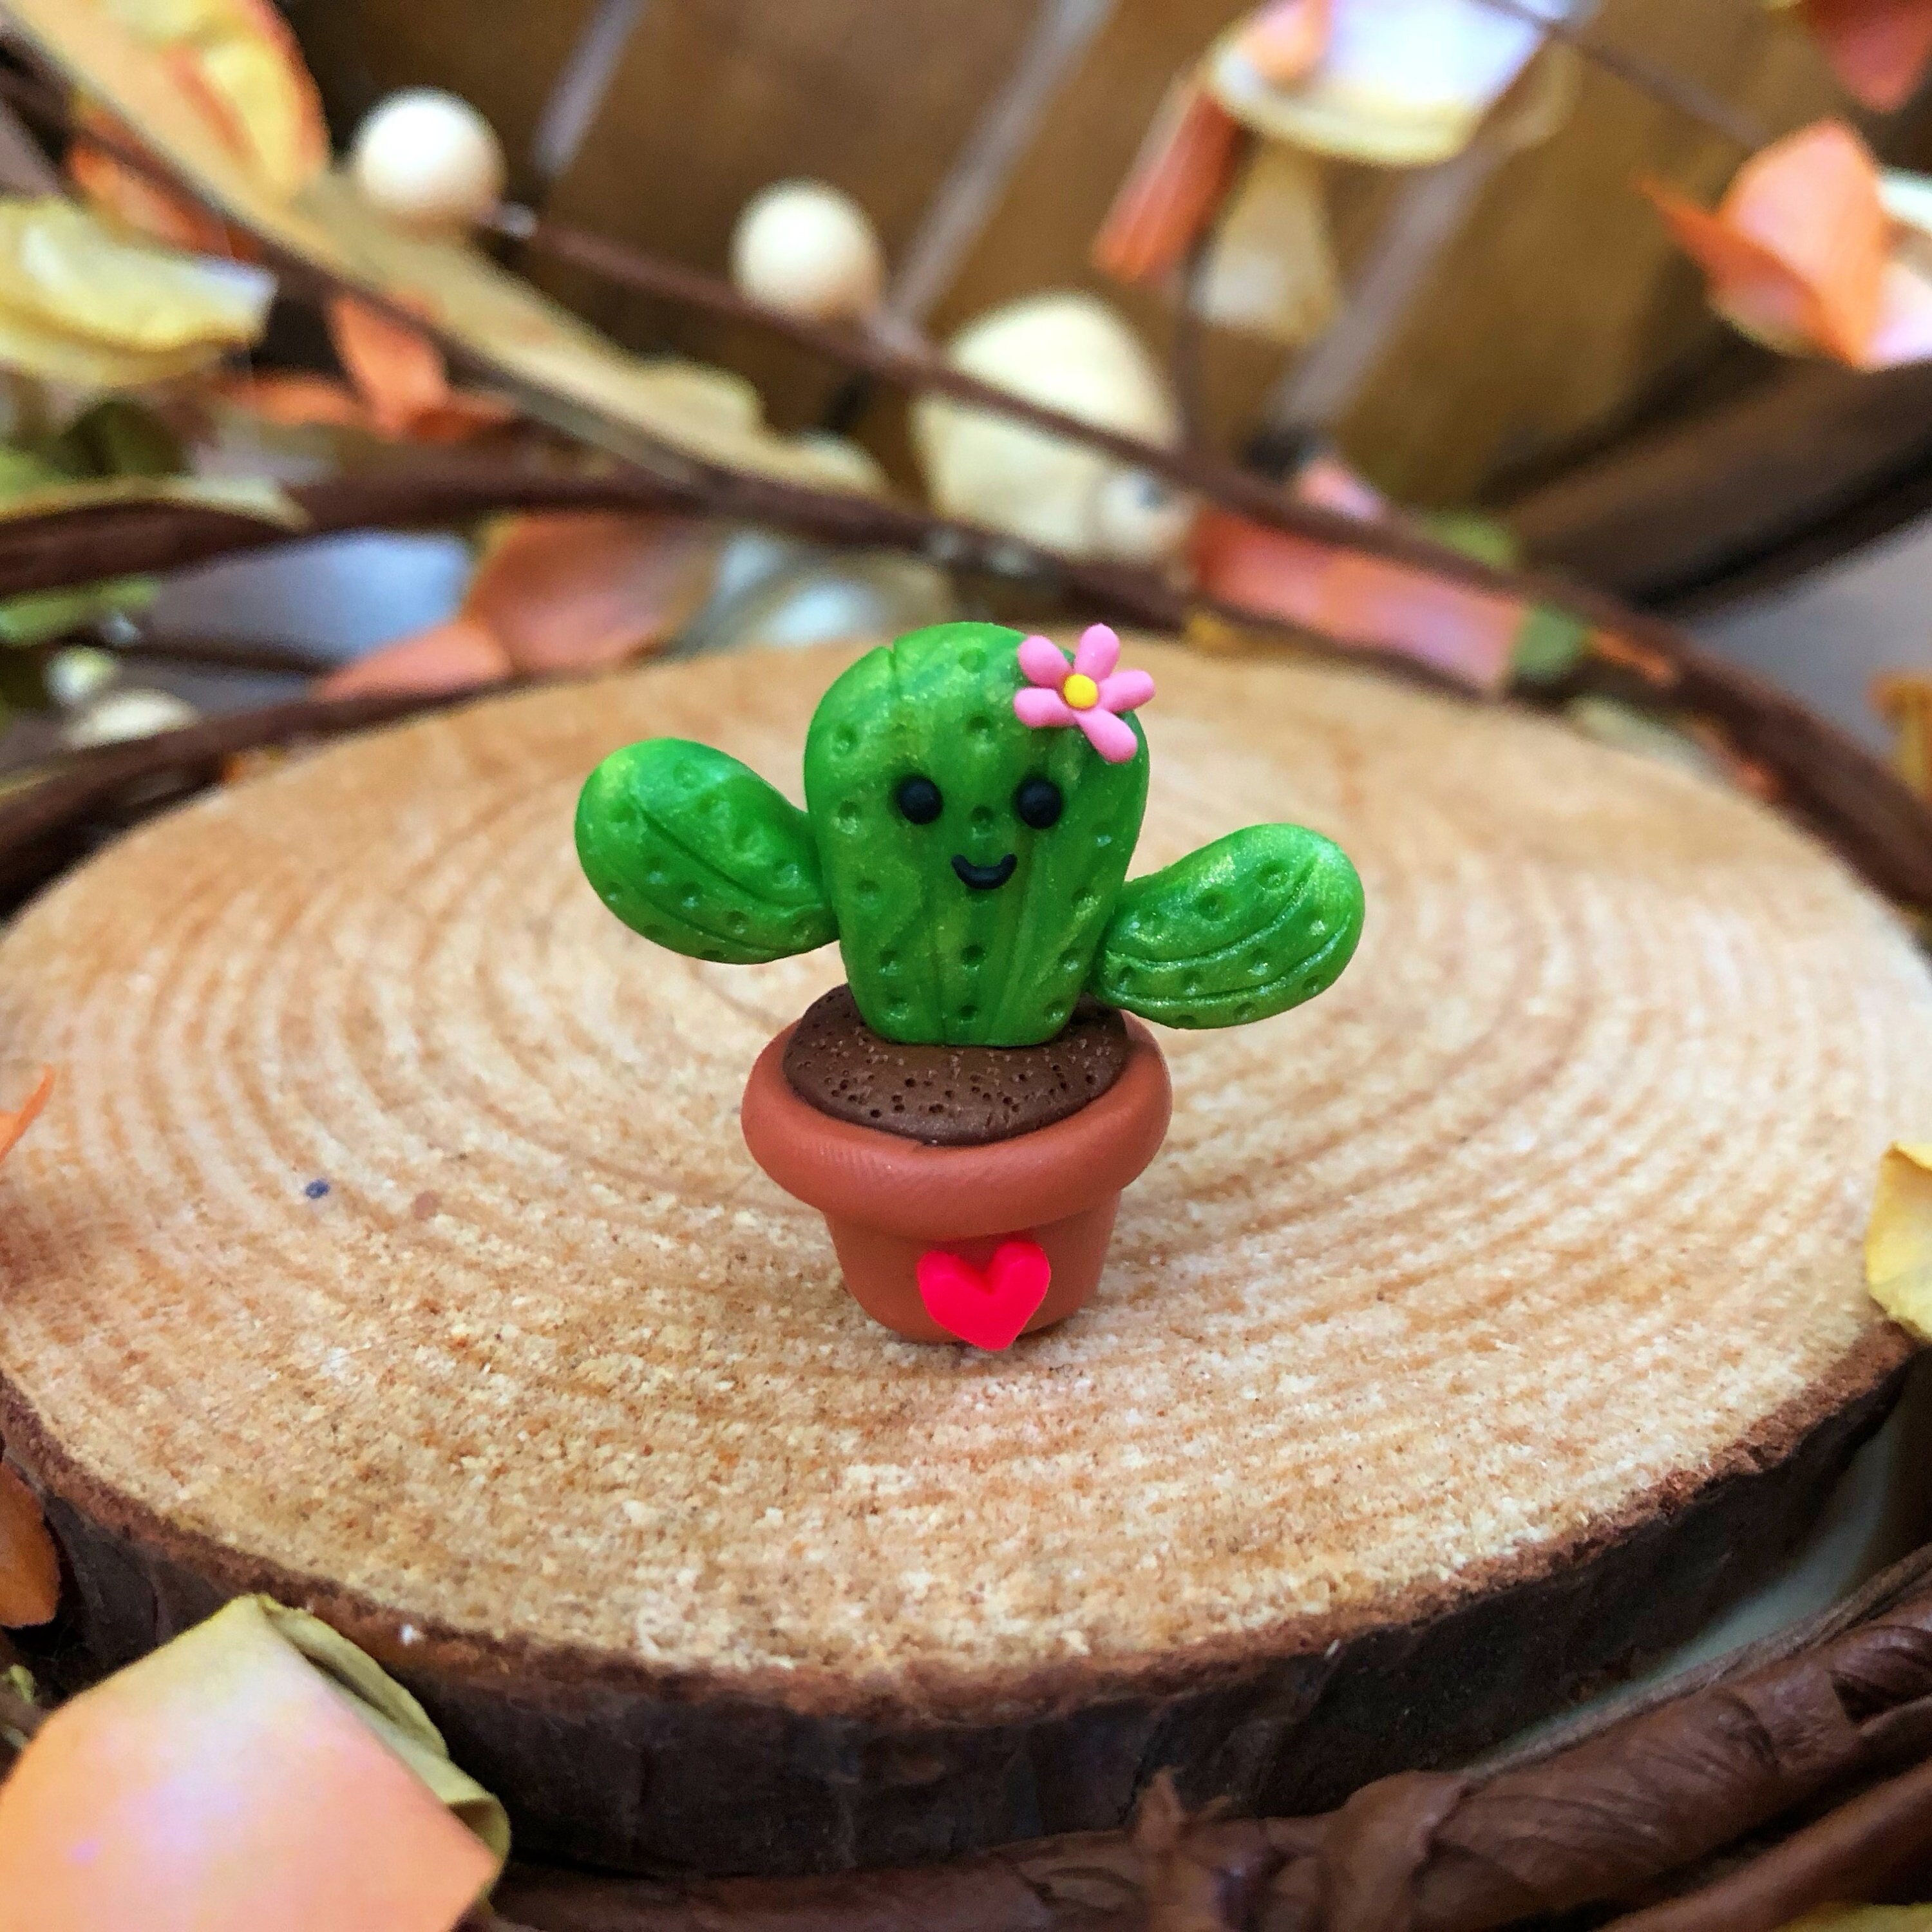 DIY Clay Cactus Craft - Cute Polymer Craft for Kids